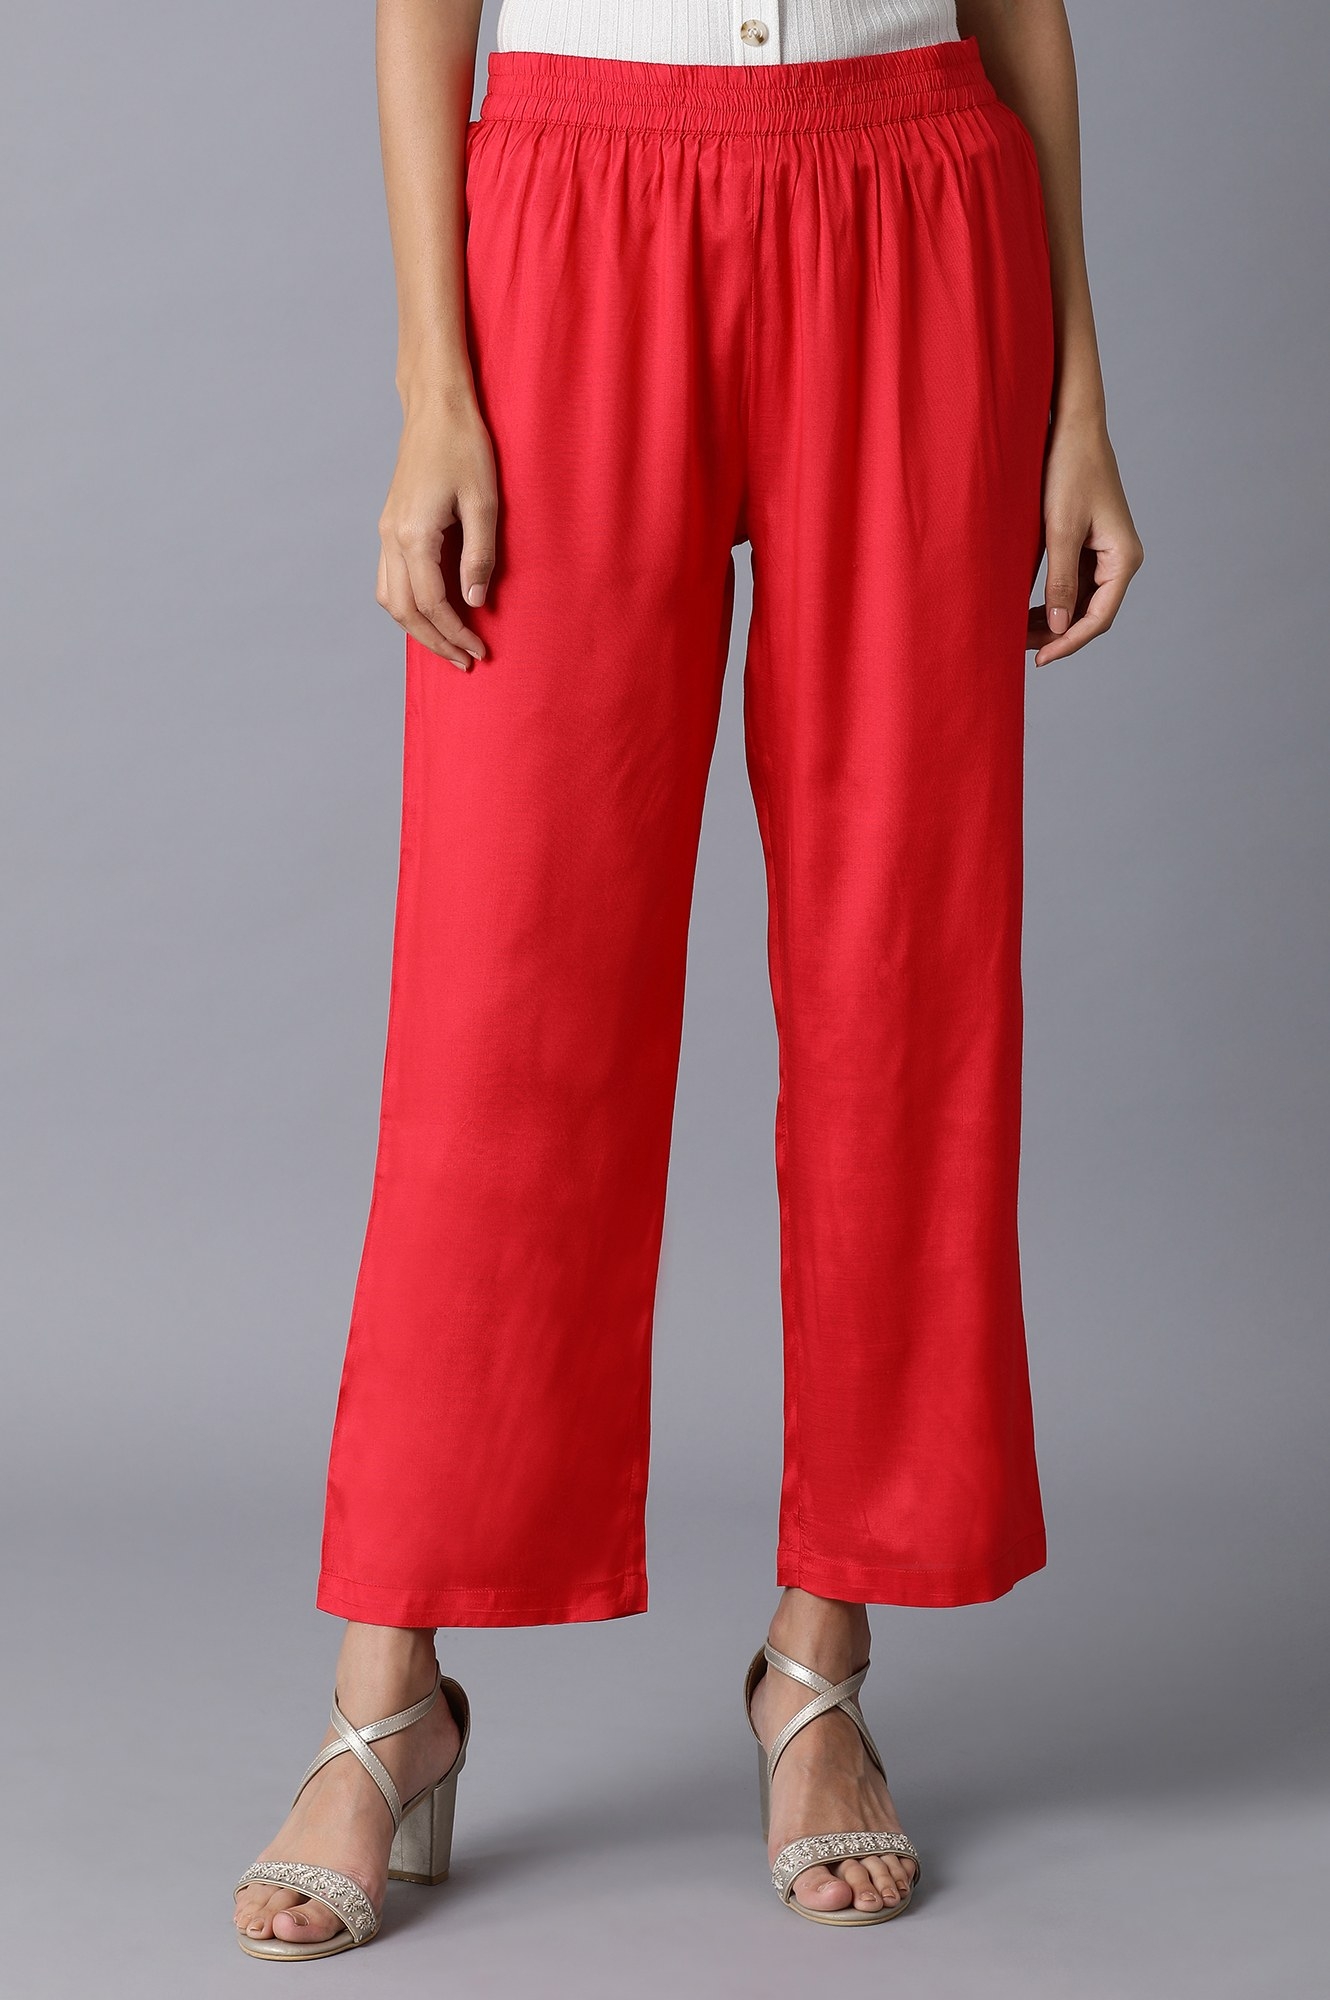 W | Wishful by W Coral Red Parallel Pants